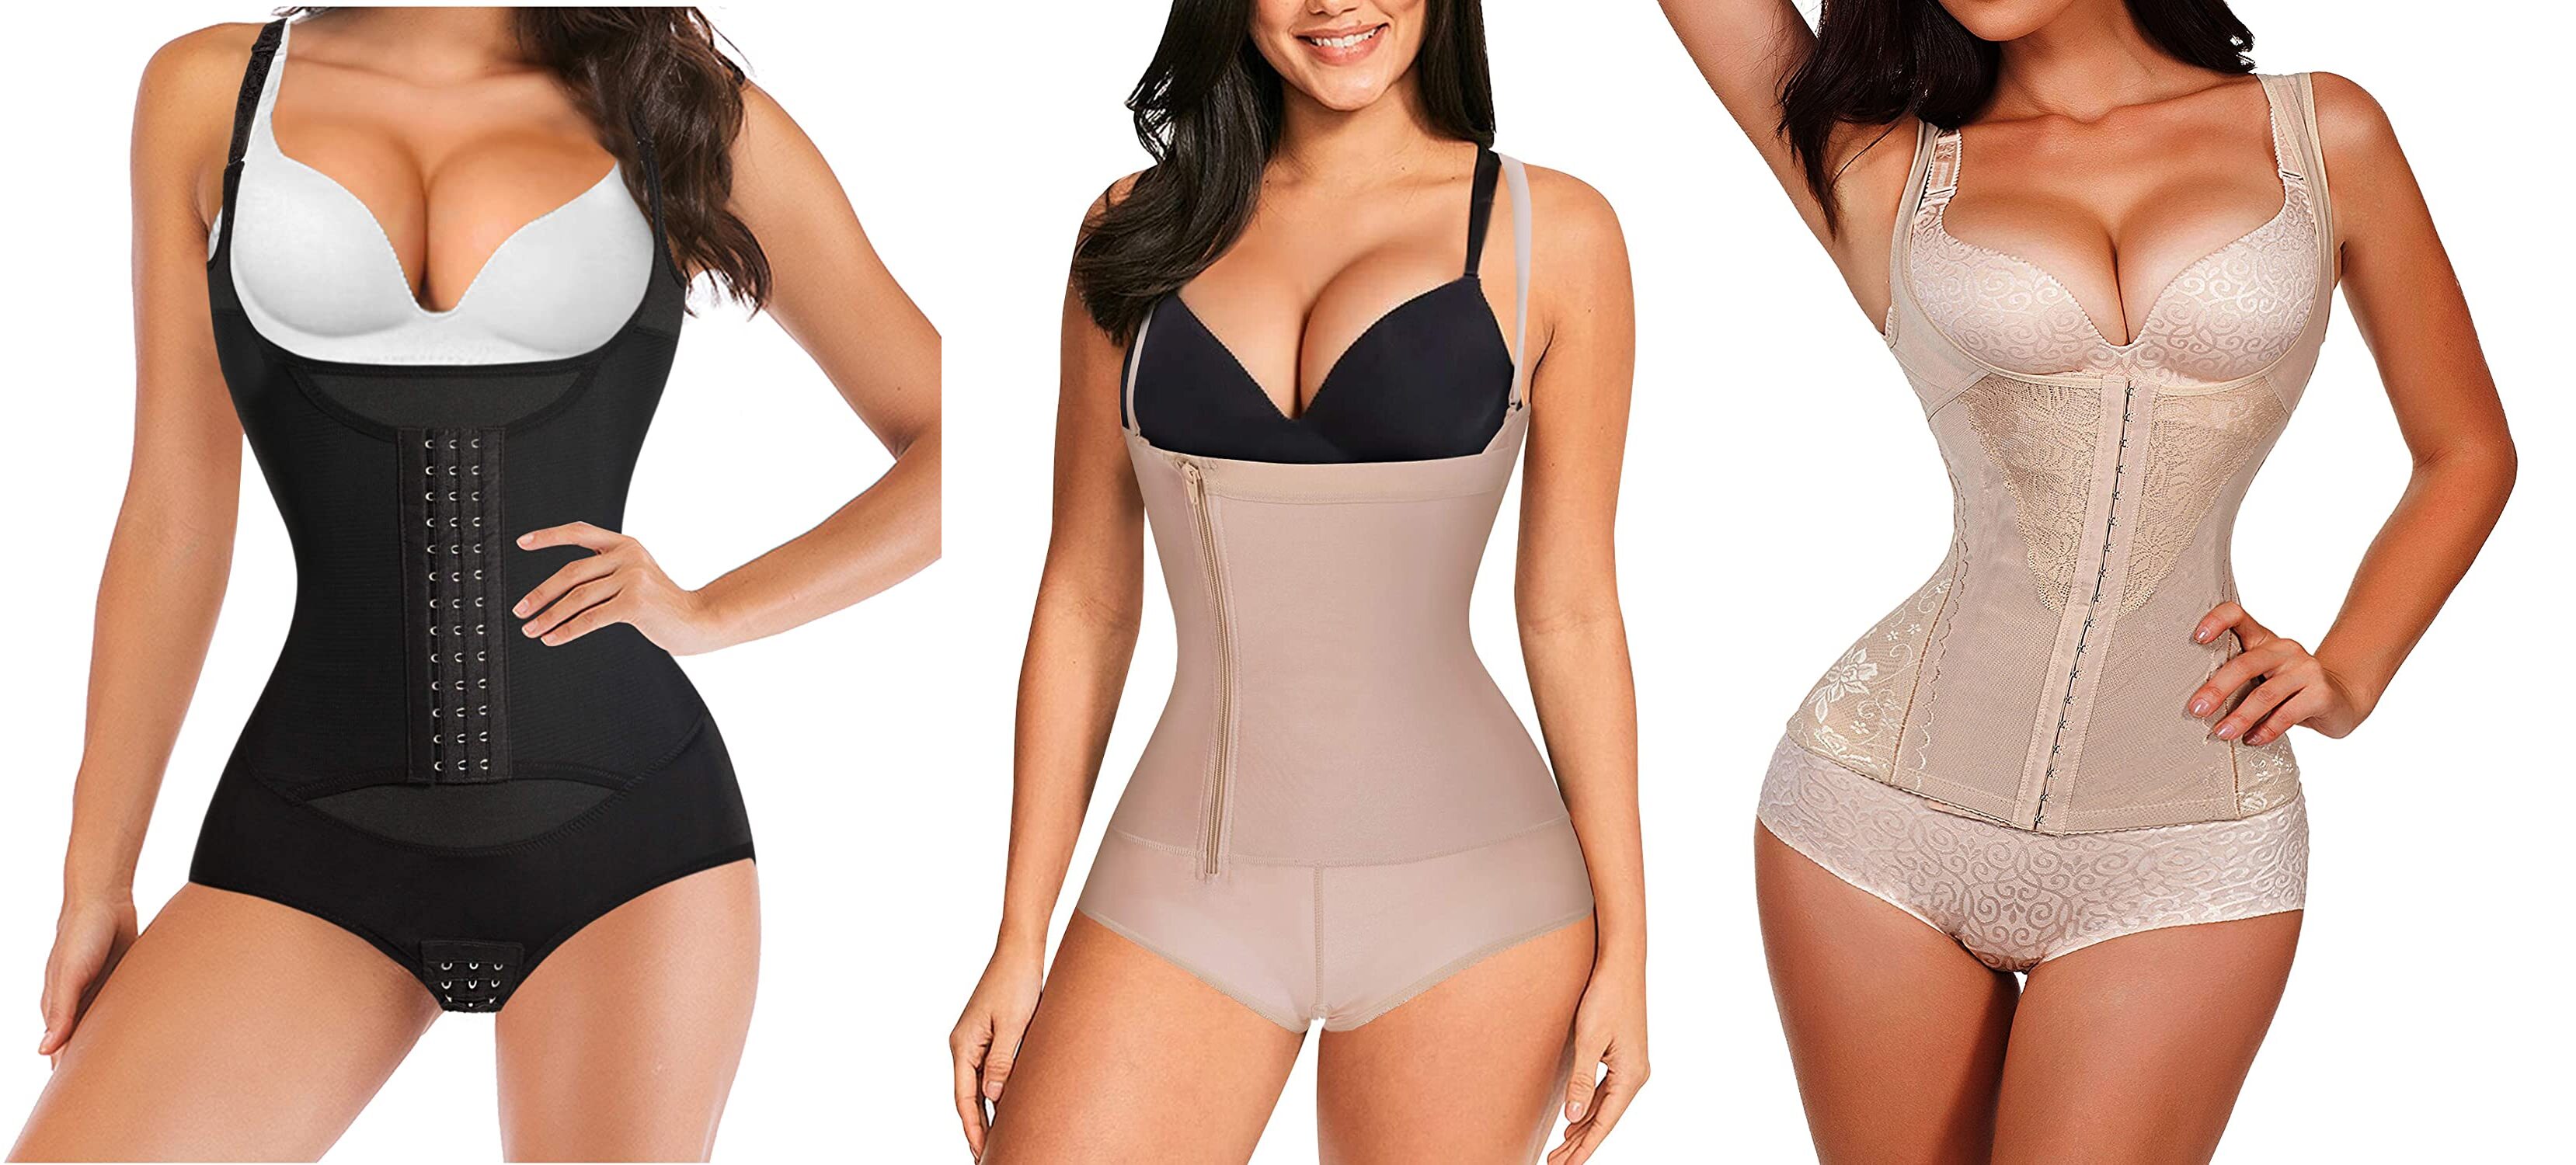 different types of waist trainers for women